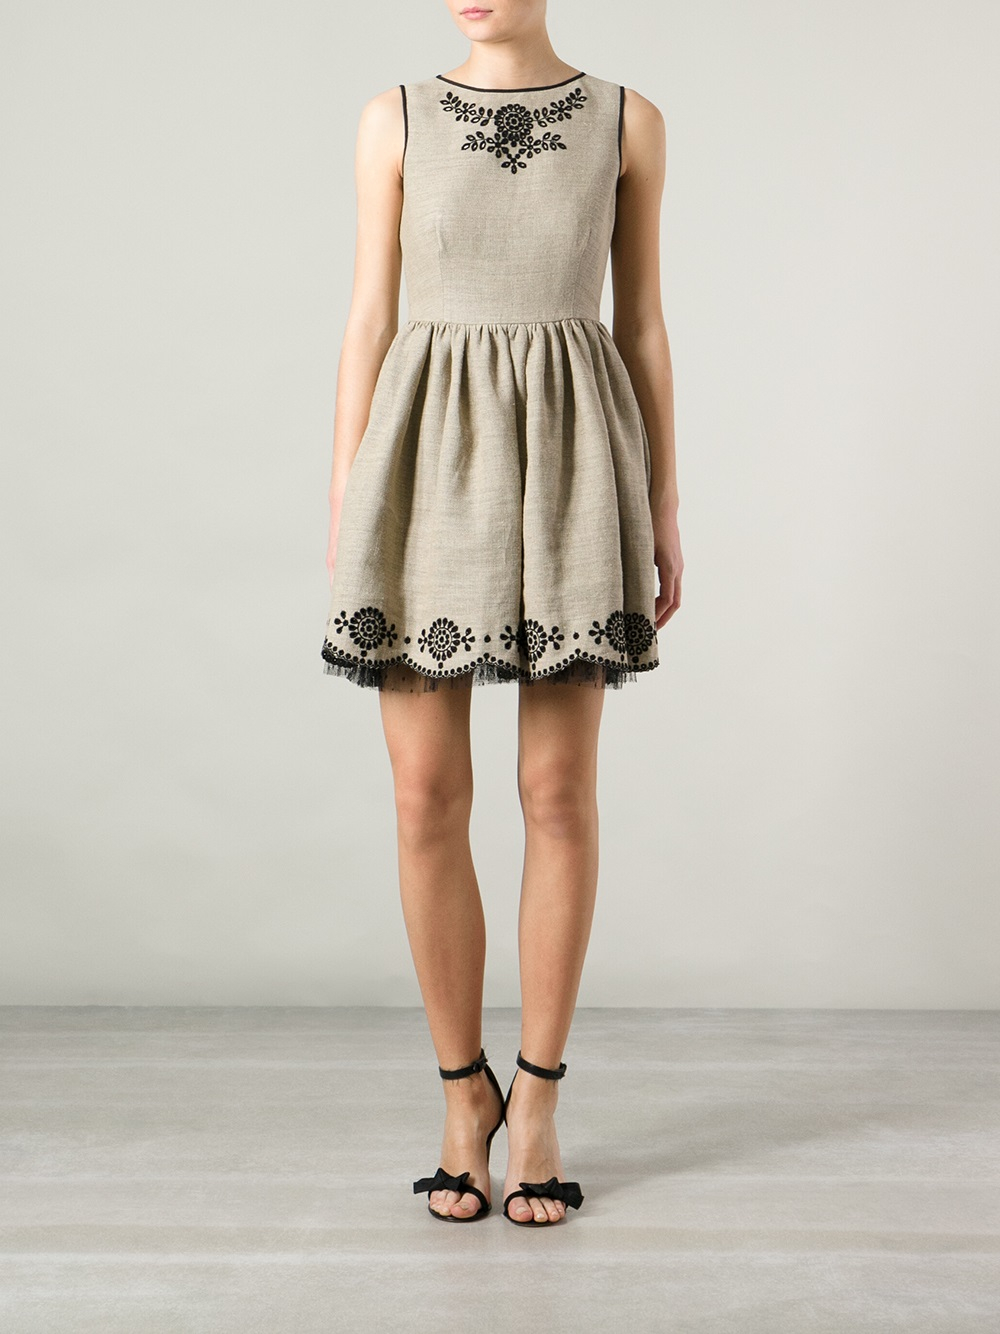 Lyst - Red valentino Jute Dress in Natural